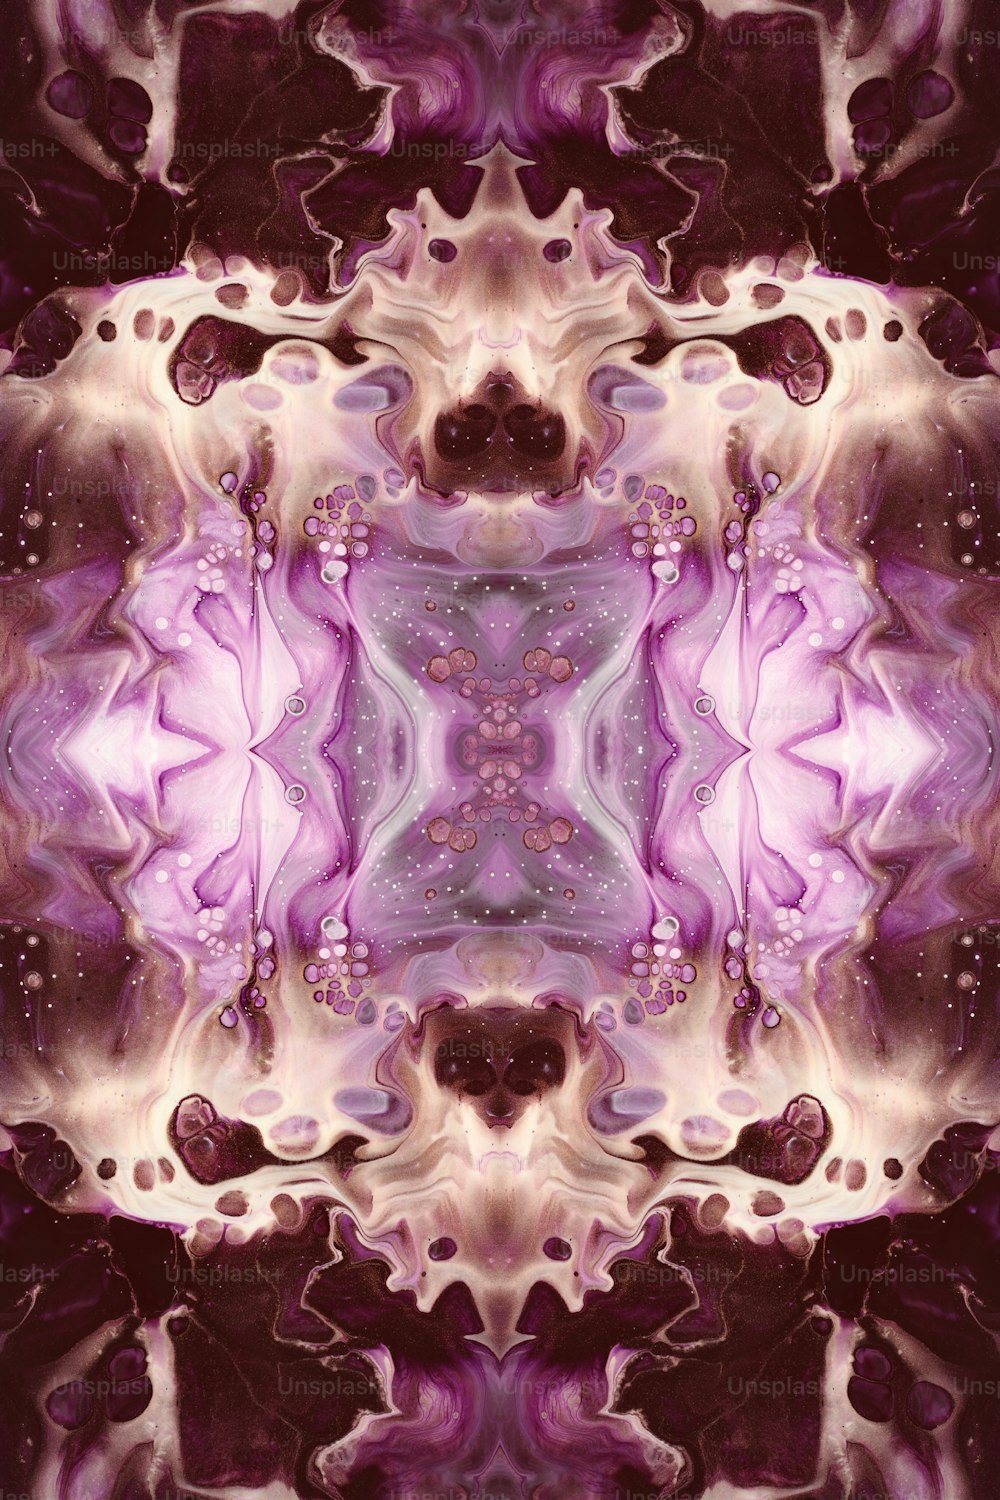 a computer generated image of a purple flower